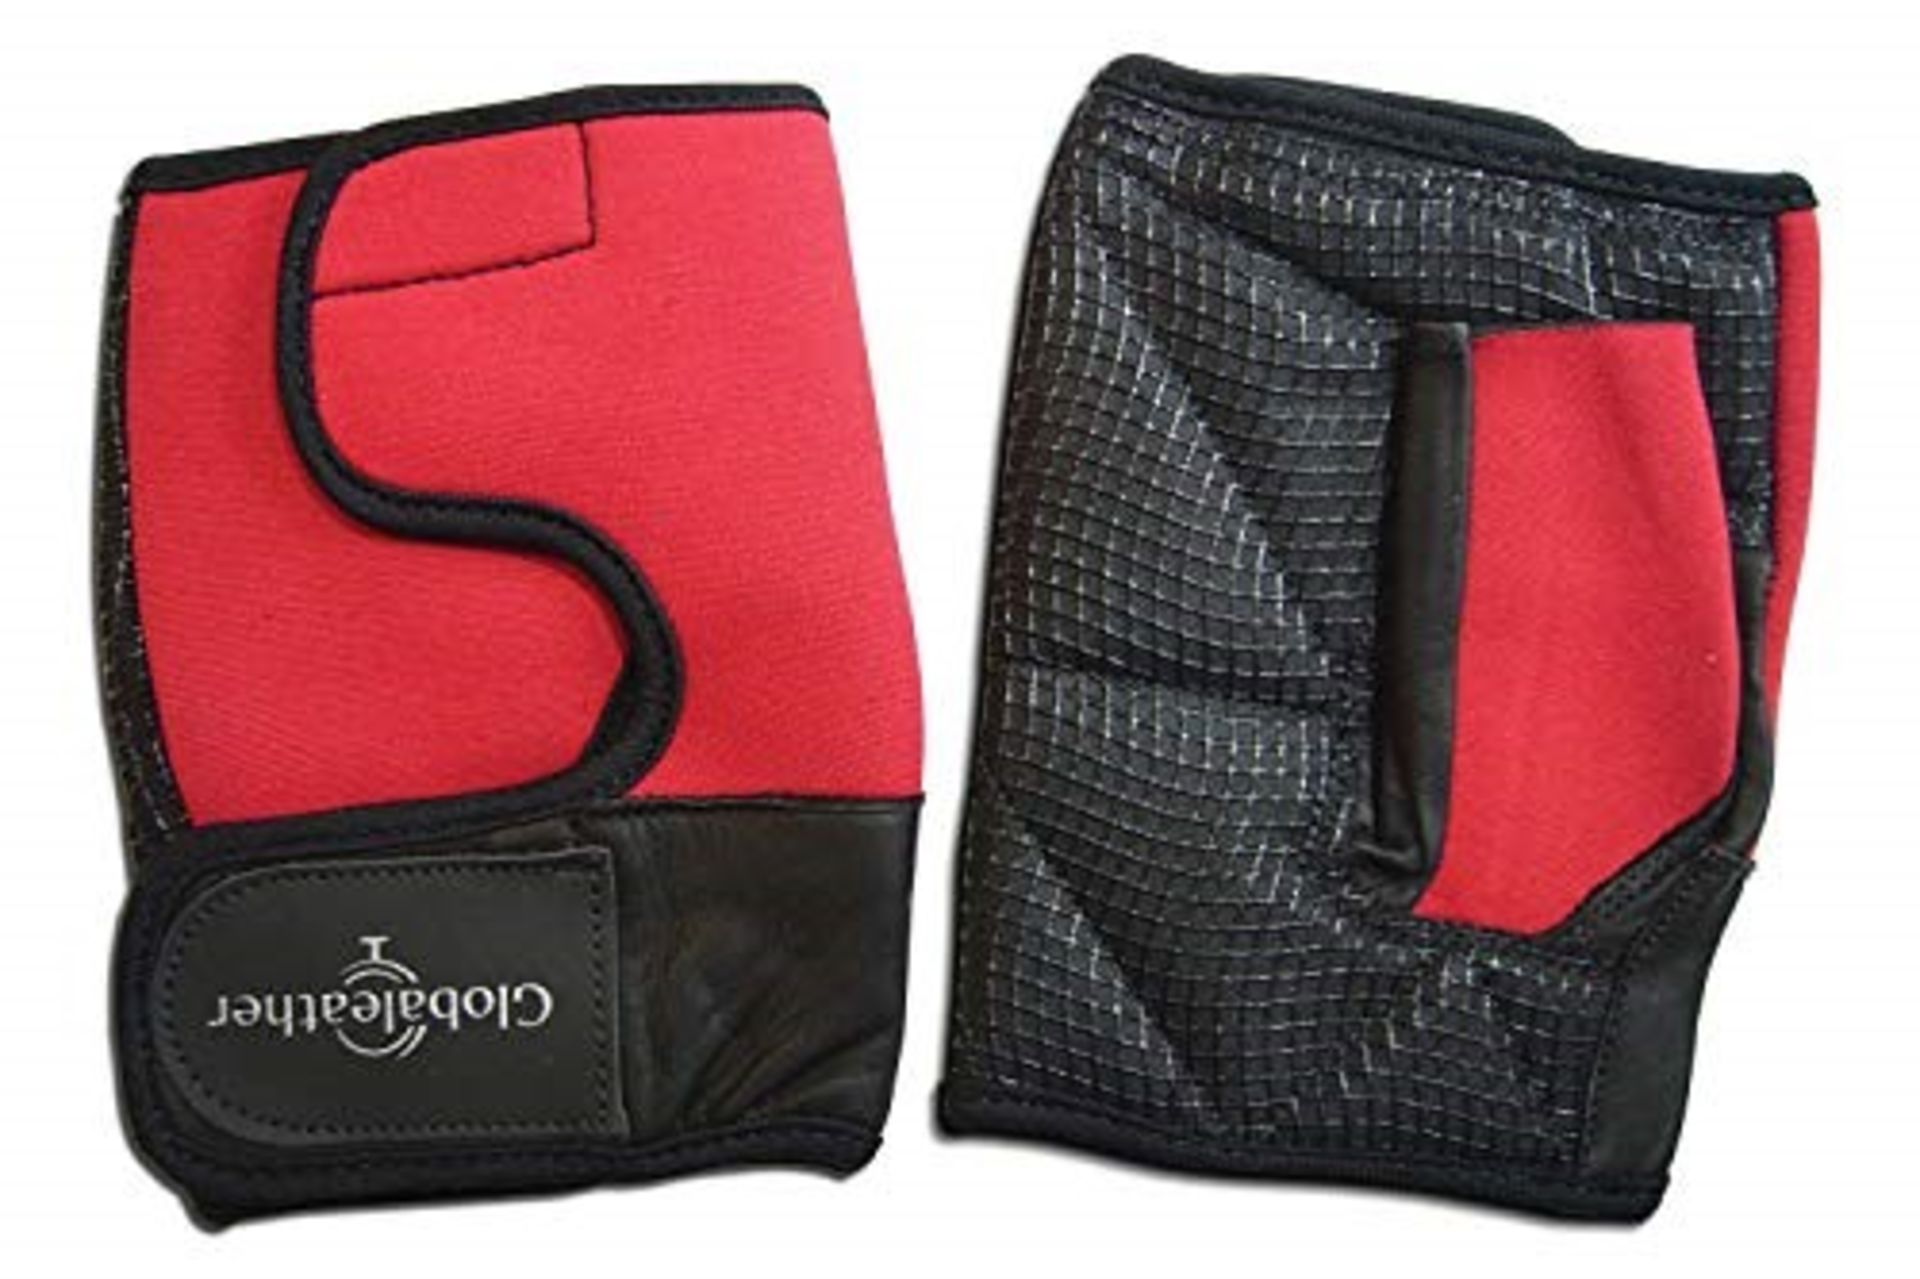 ME : 1 AS NEW GLOBALLEATHER WHEEL CHAIR HAND WRAP IN RED - SIZE MEDIUM / RRP £23.95 (VIEWING